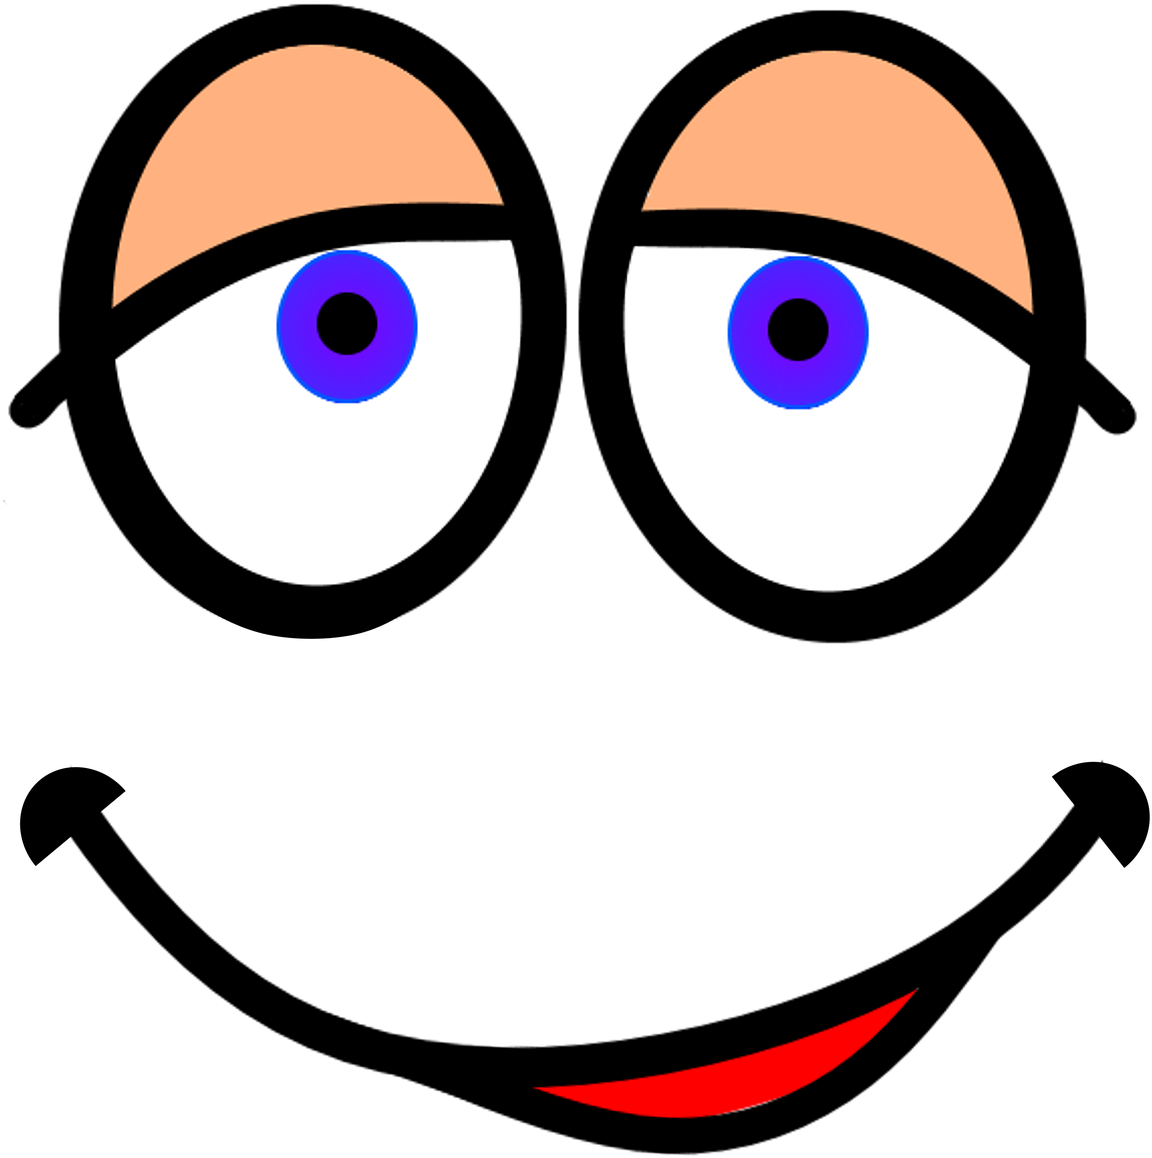 Cartoon Laughing Face Graphic PNG image